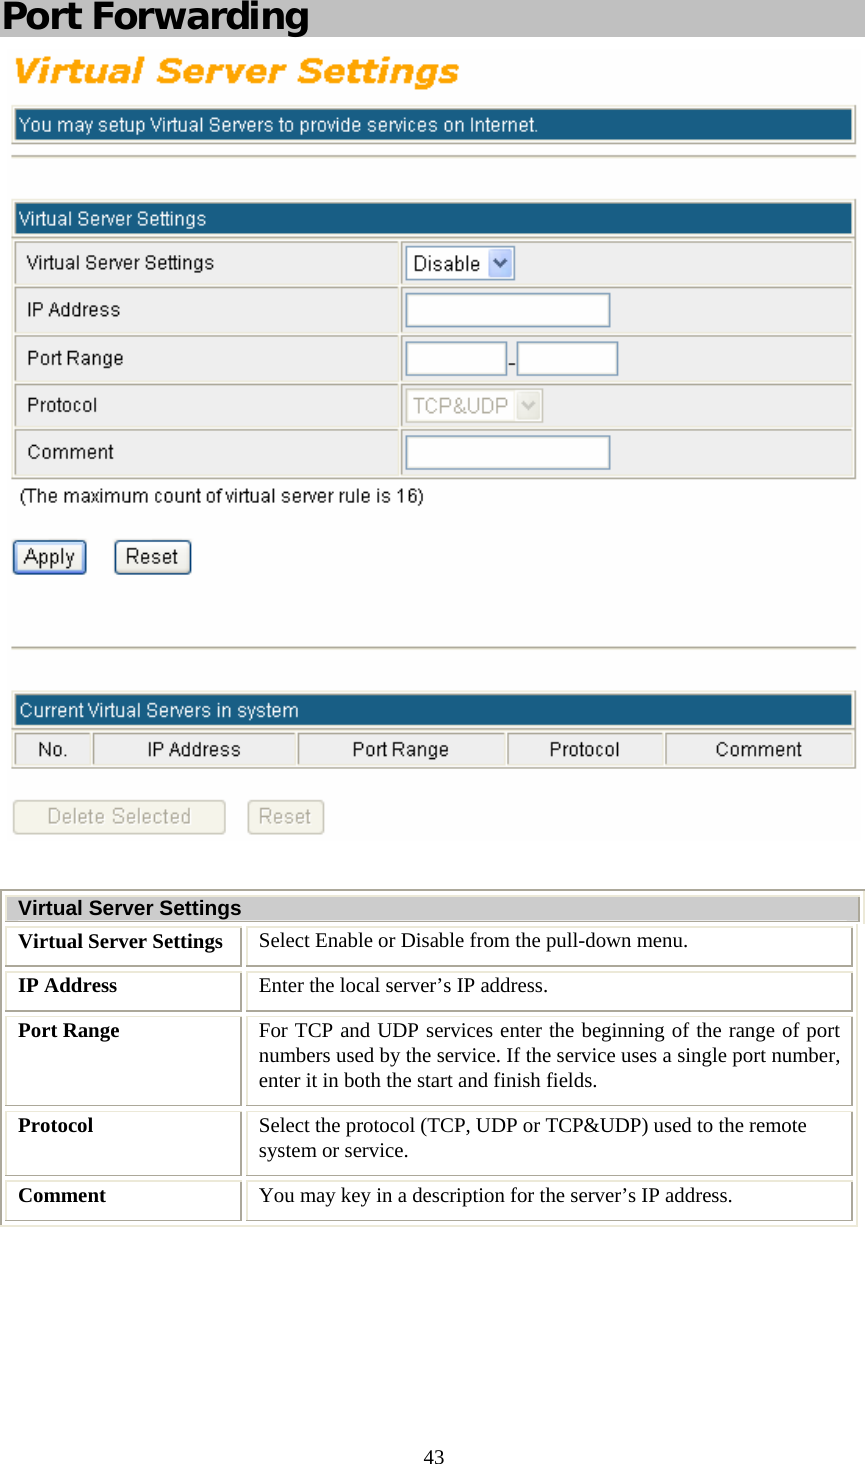   43 Port Forwarding   Virtual Server Settings Virtual Server Settings  Select Enable or Disable from the pull-down menu. IP Address  Enter the local server’s IP address. Port Range  For TCP and UDP services enter the beginning of the range of port numbers used by the service. If the service uses a single port number, enter it in both the start and finish fields. Protocol  Select the protocol (TCP, UDP or TCP&amp;UDP) used to the remote system or service. Comment  You may key in a description for the server’s IP address.  